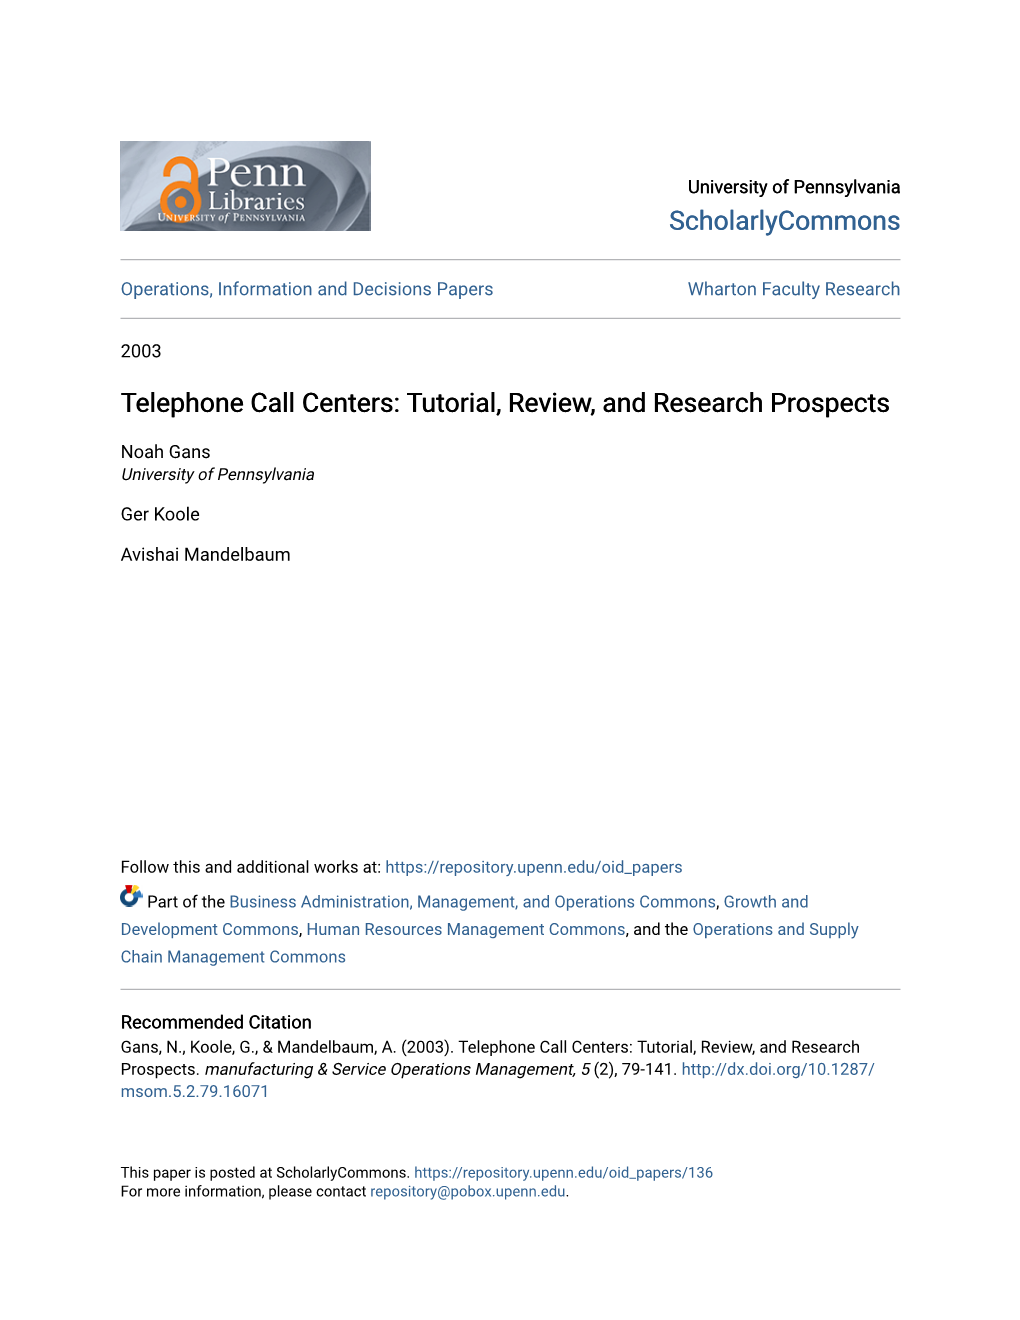 Telephone Call Centers: Tutorial, Review, and Research Prospects